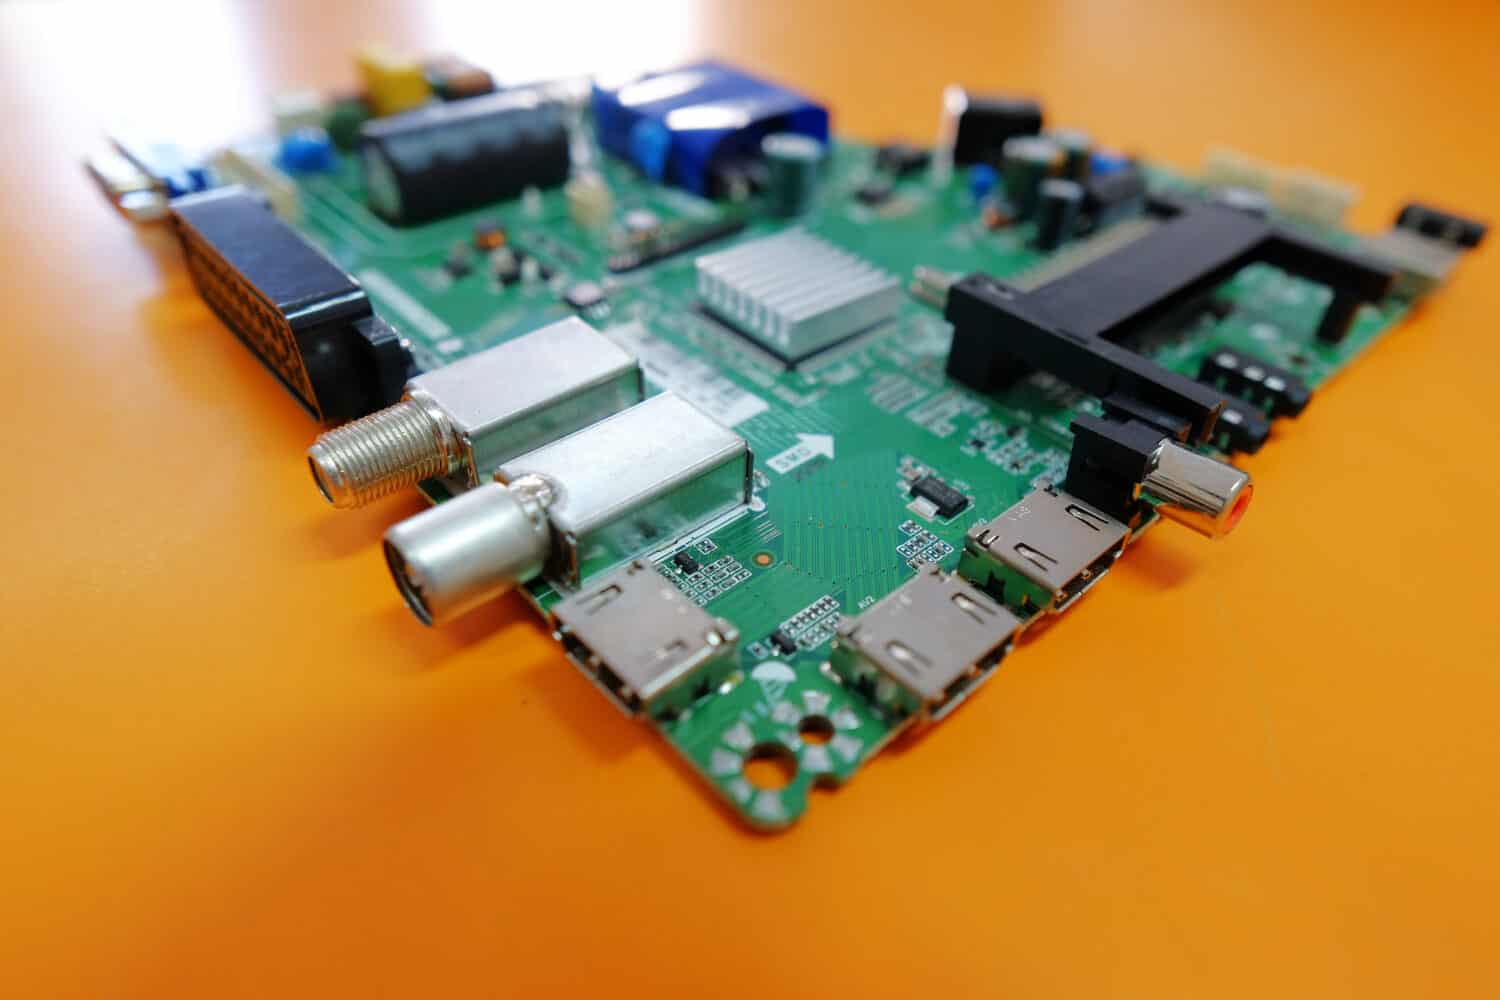 RF module and HDMI connectors on a printed circuit board, narrow dept of field.